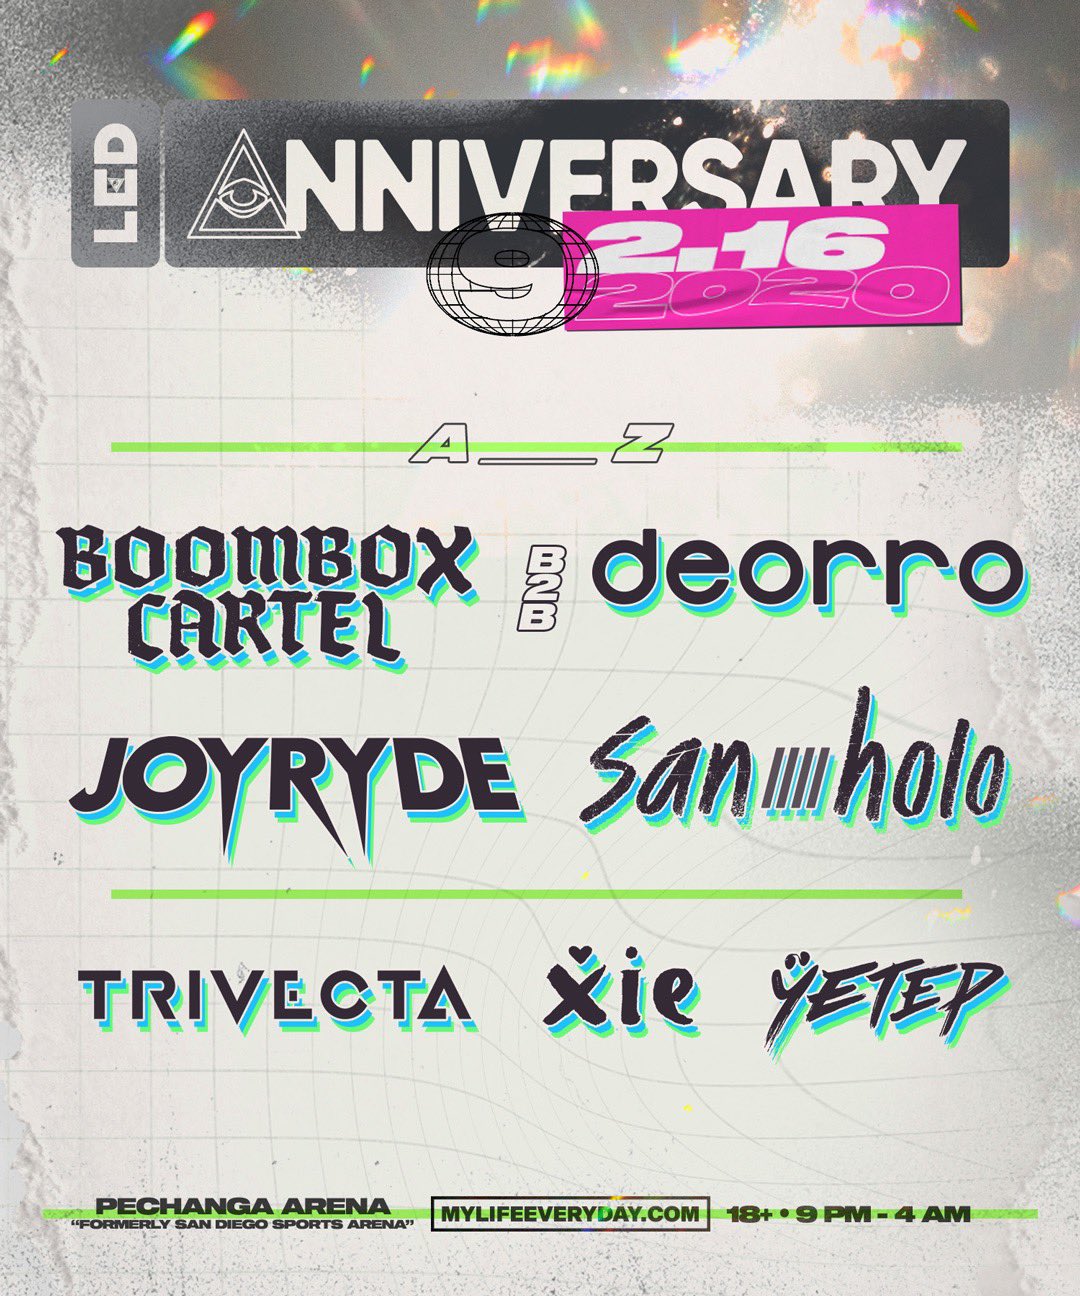 TICKETS LED Anniversary 2020 Lineup Announced